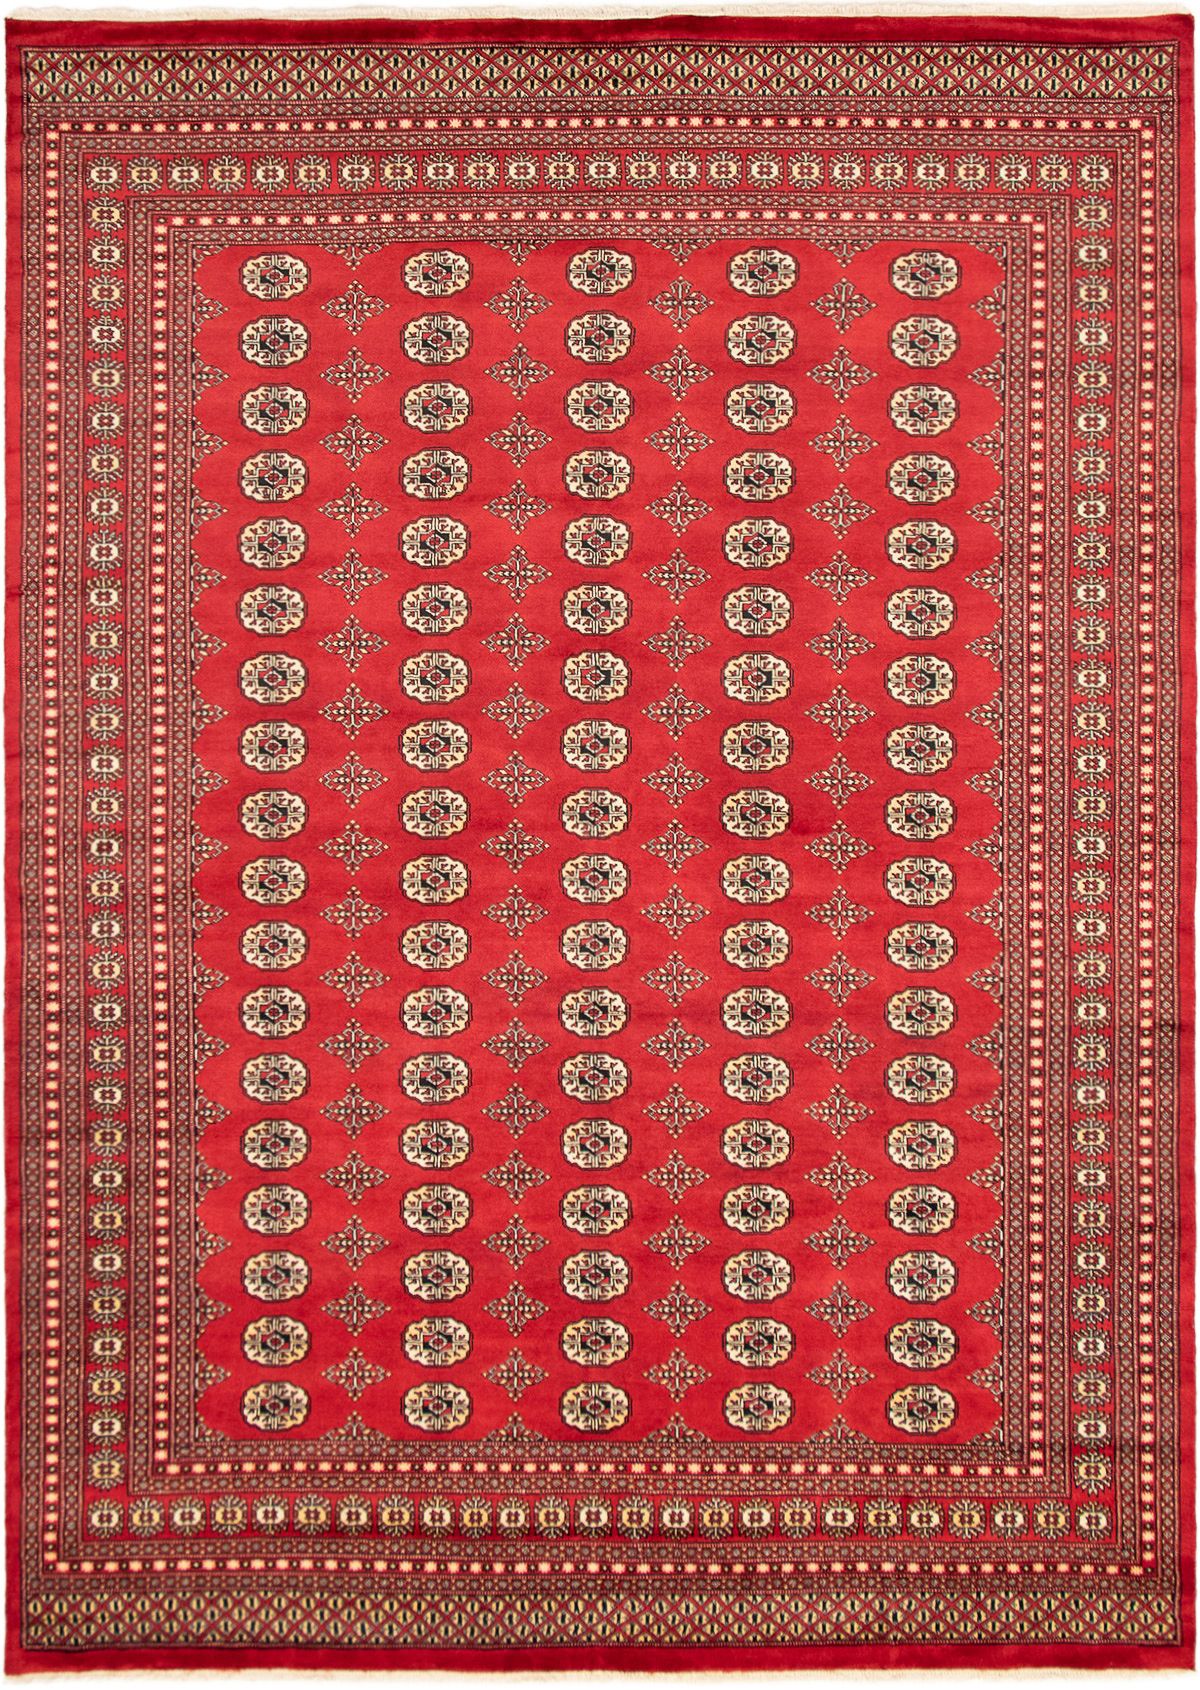 Hand-knotted Finest Peshawar Bokhara Red Wool Rug 8'10" x 12'6" Size: 8'10" x 12'6"  